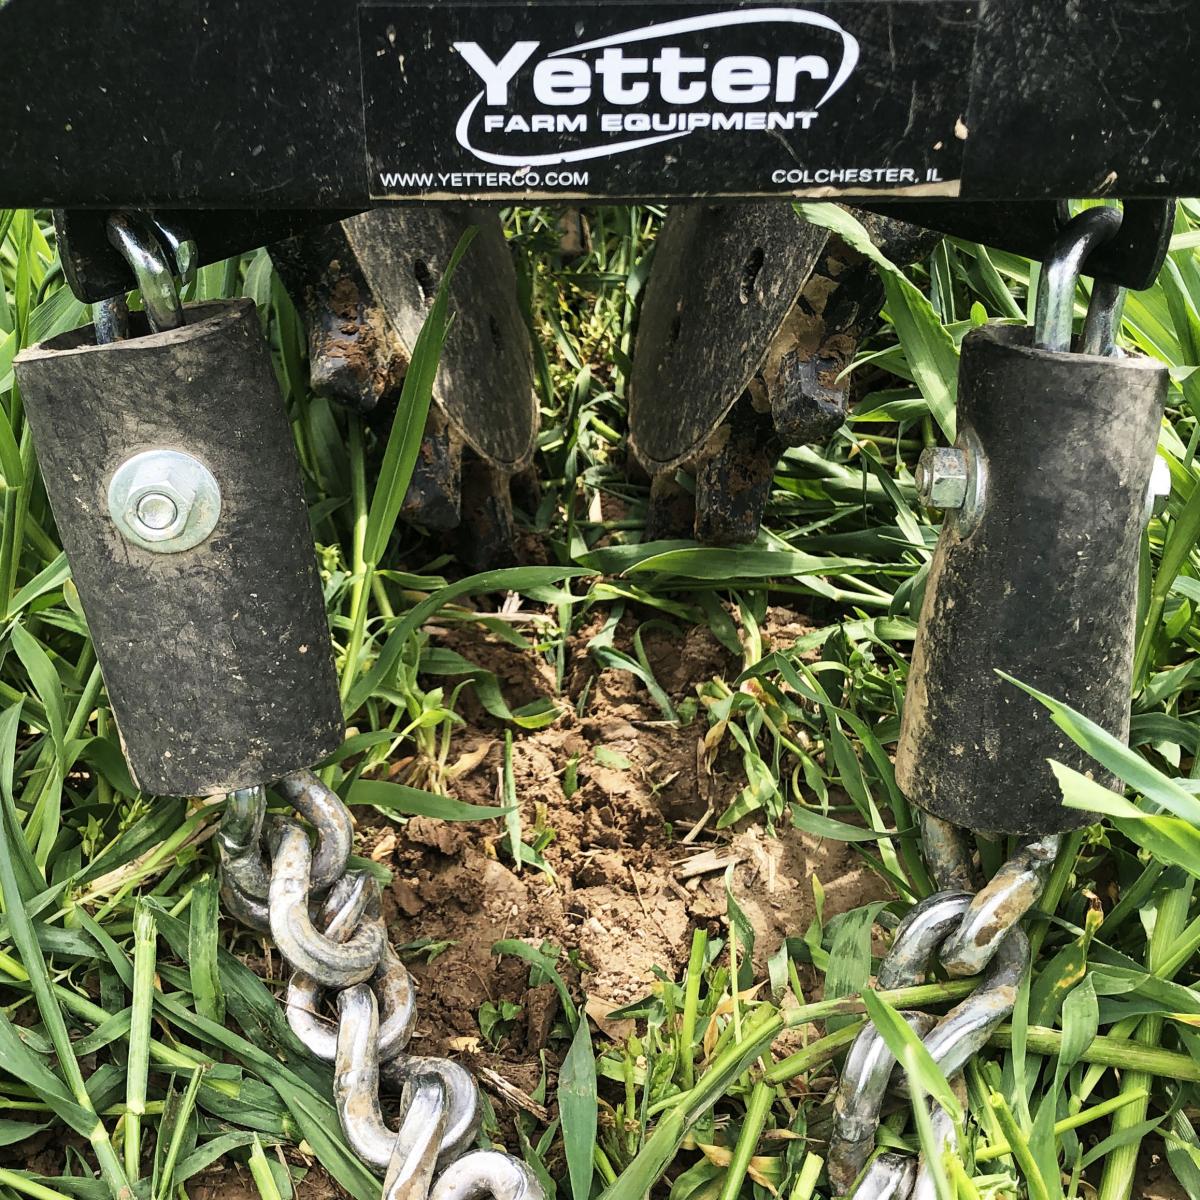 Twister closing seed trench in cover crops with drag chain.